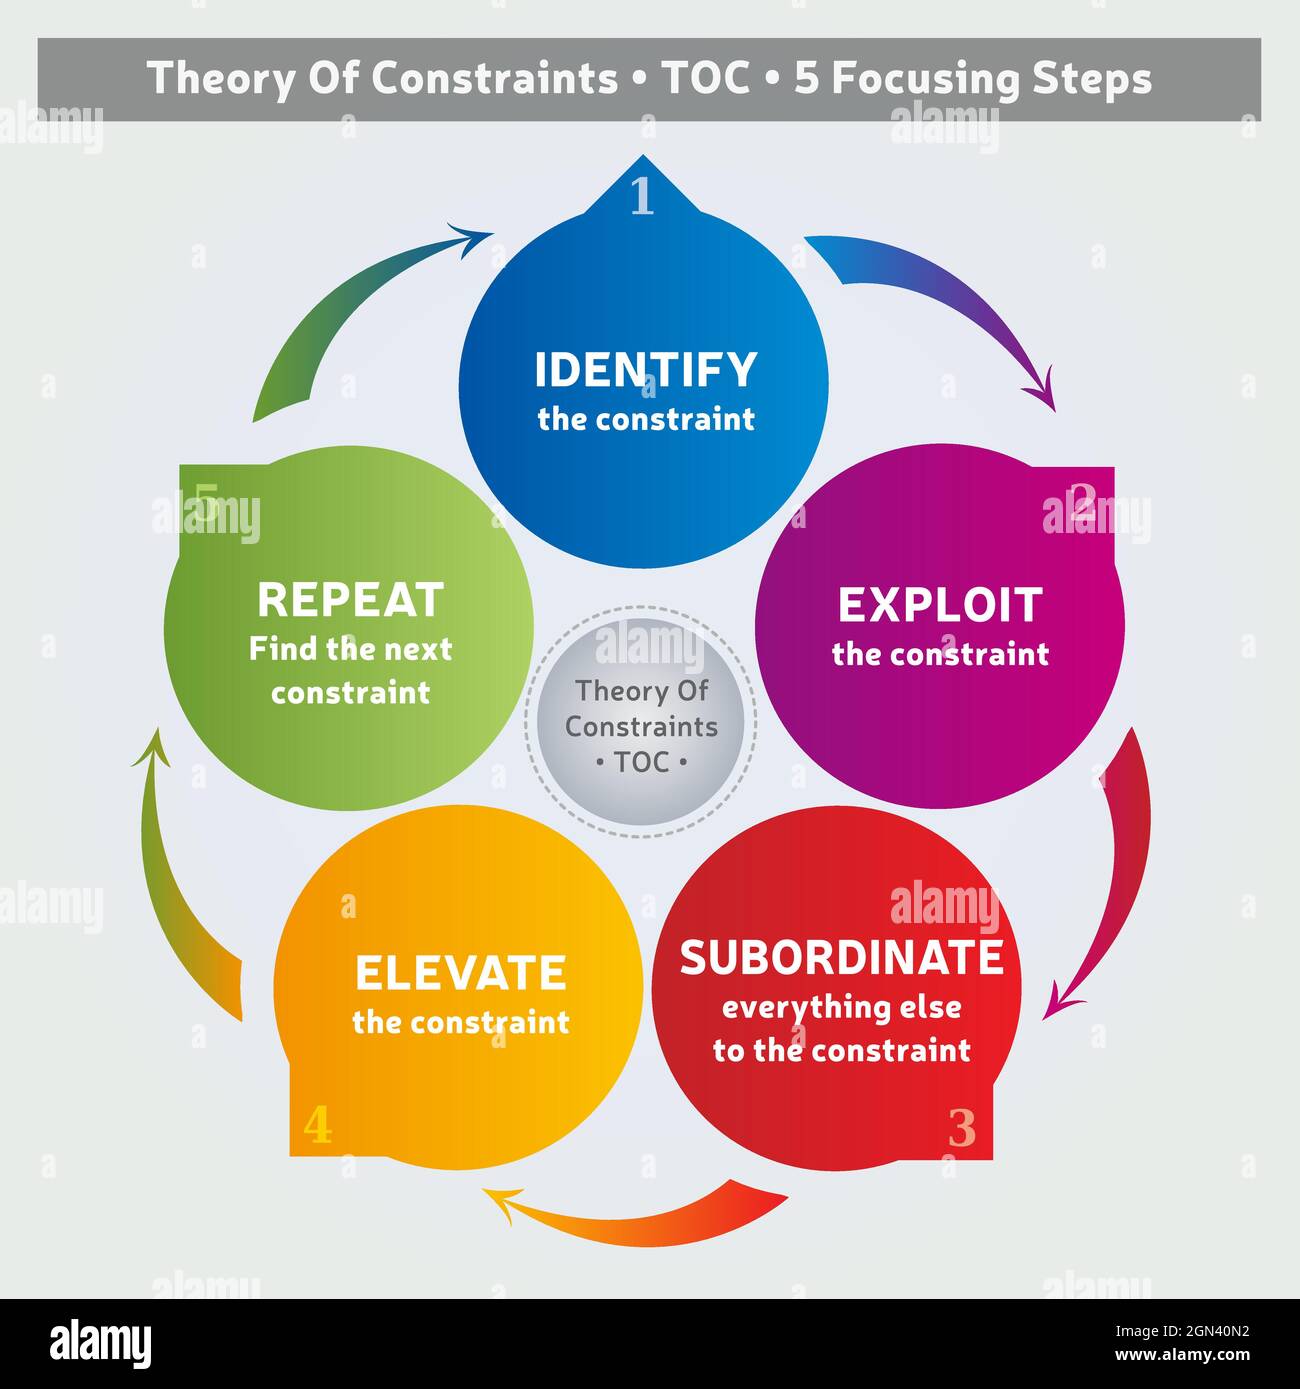 Theory Of Constraints Methodology - Diagram - 5 Steps - Coaching Tool - Business Management Stock Vector